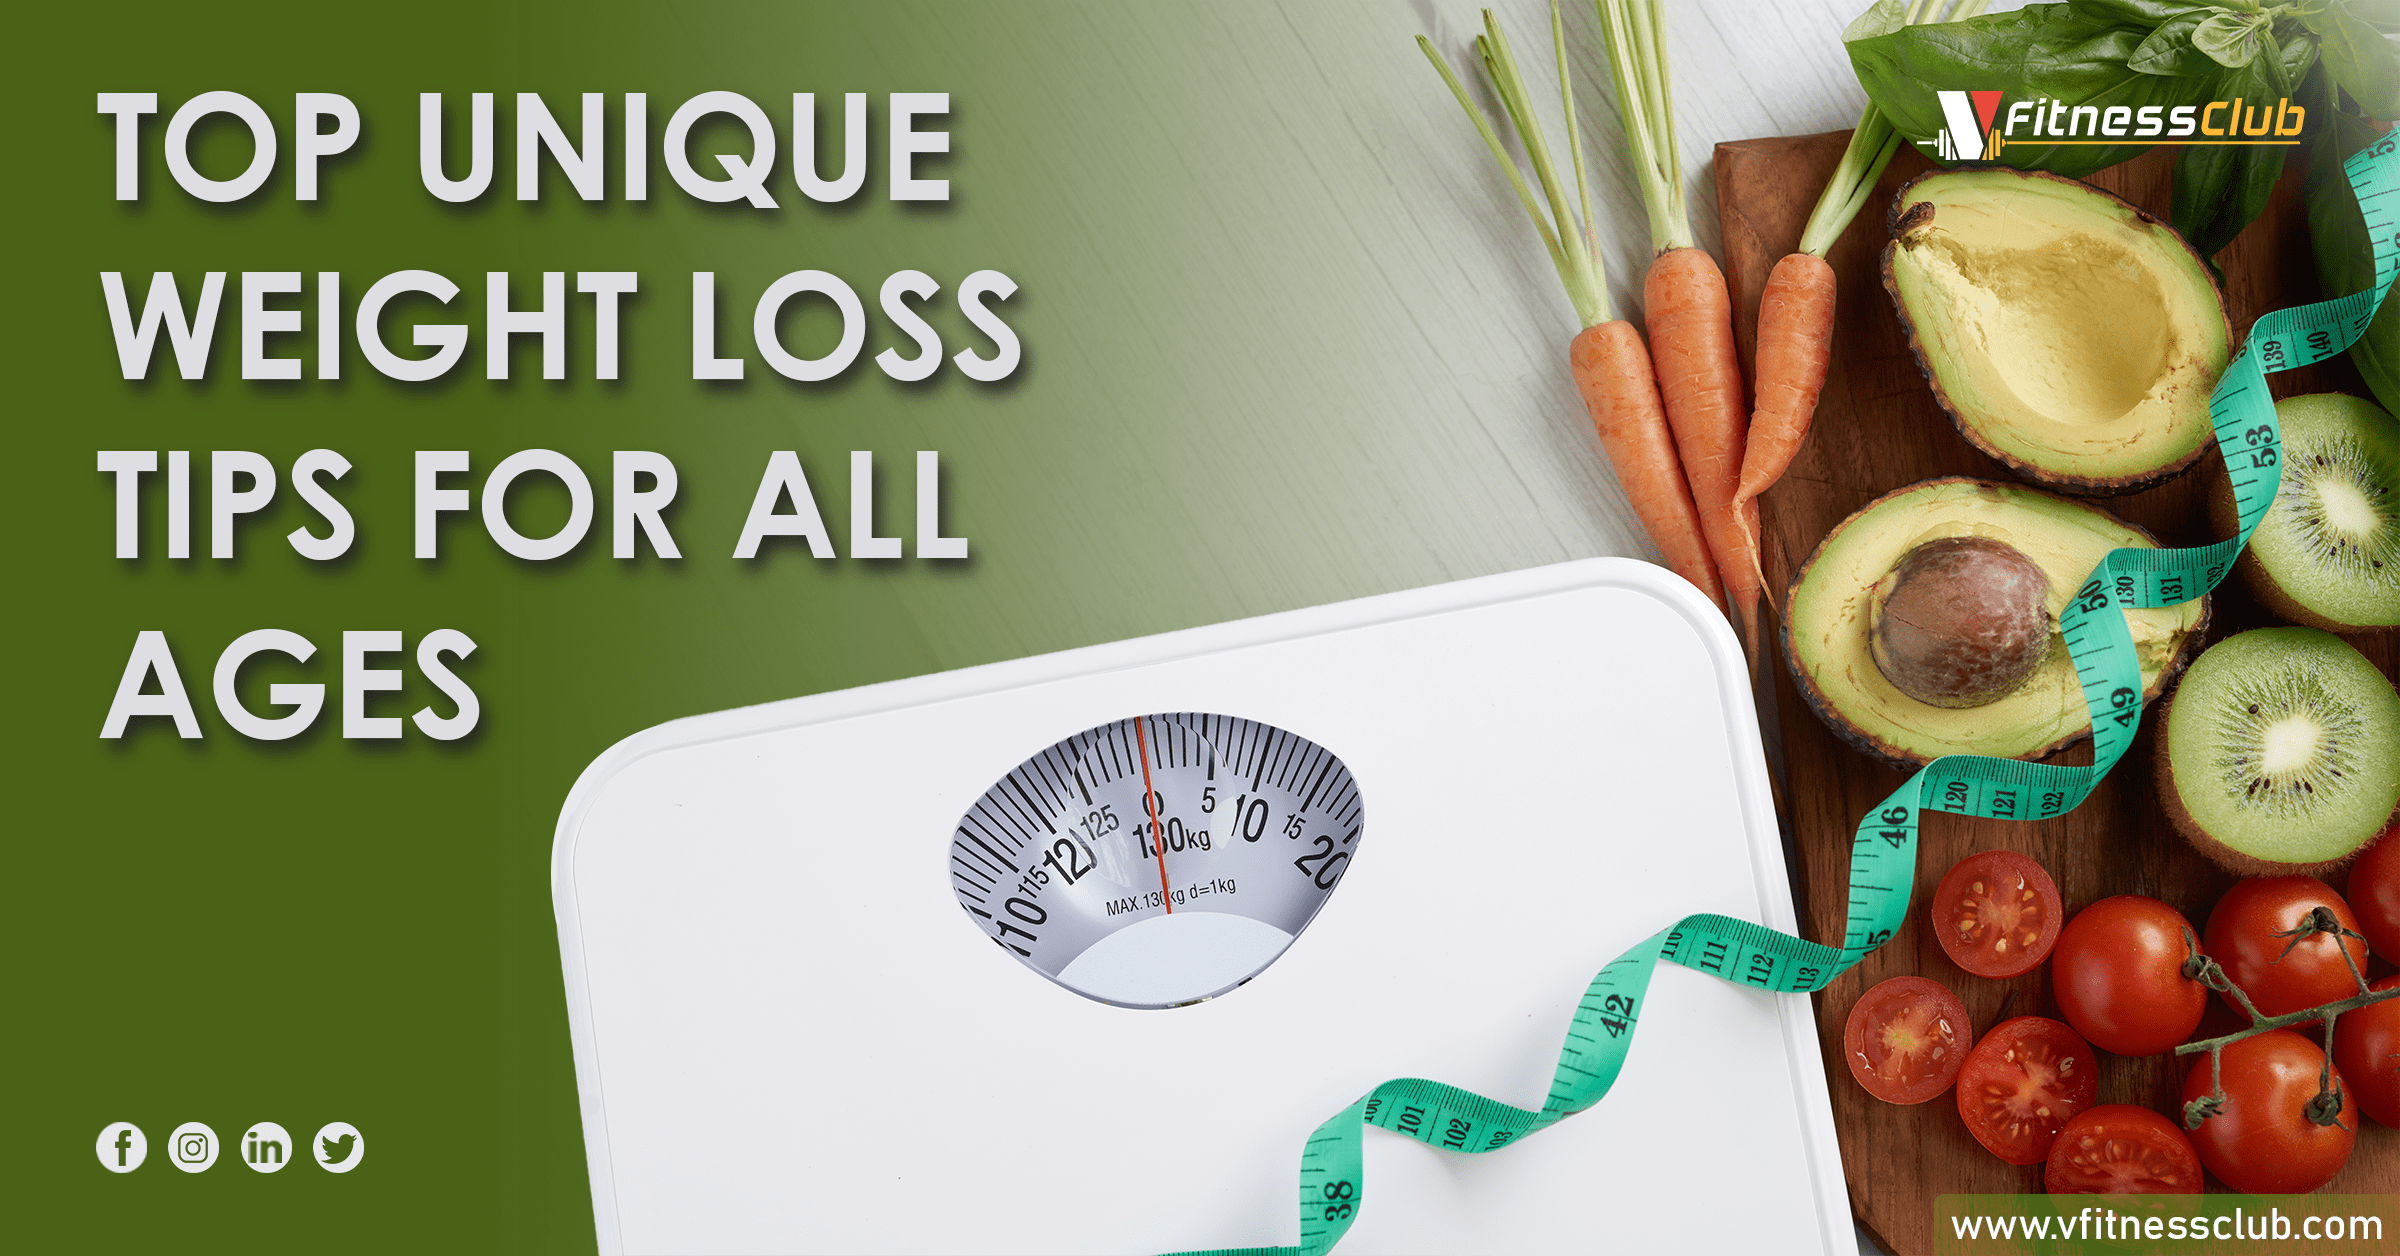 Top Unique Weight Loss Tips For All Ages